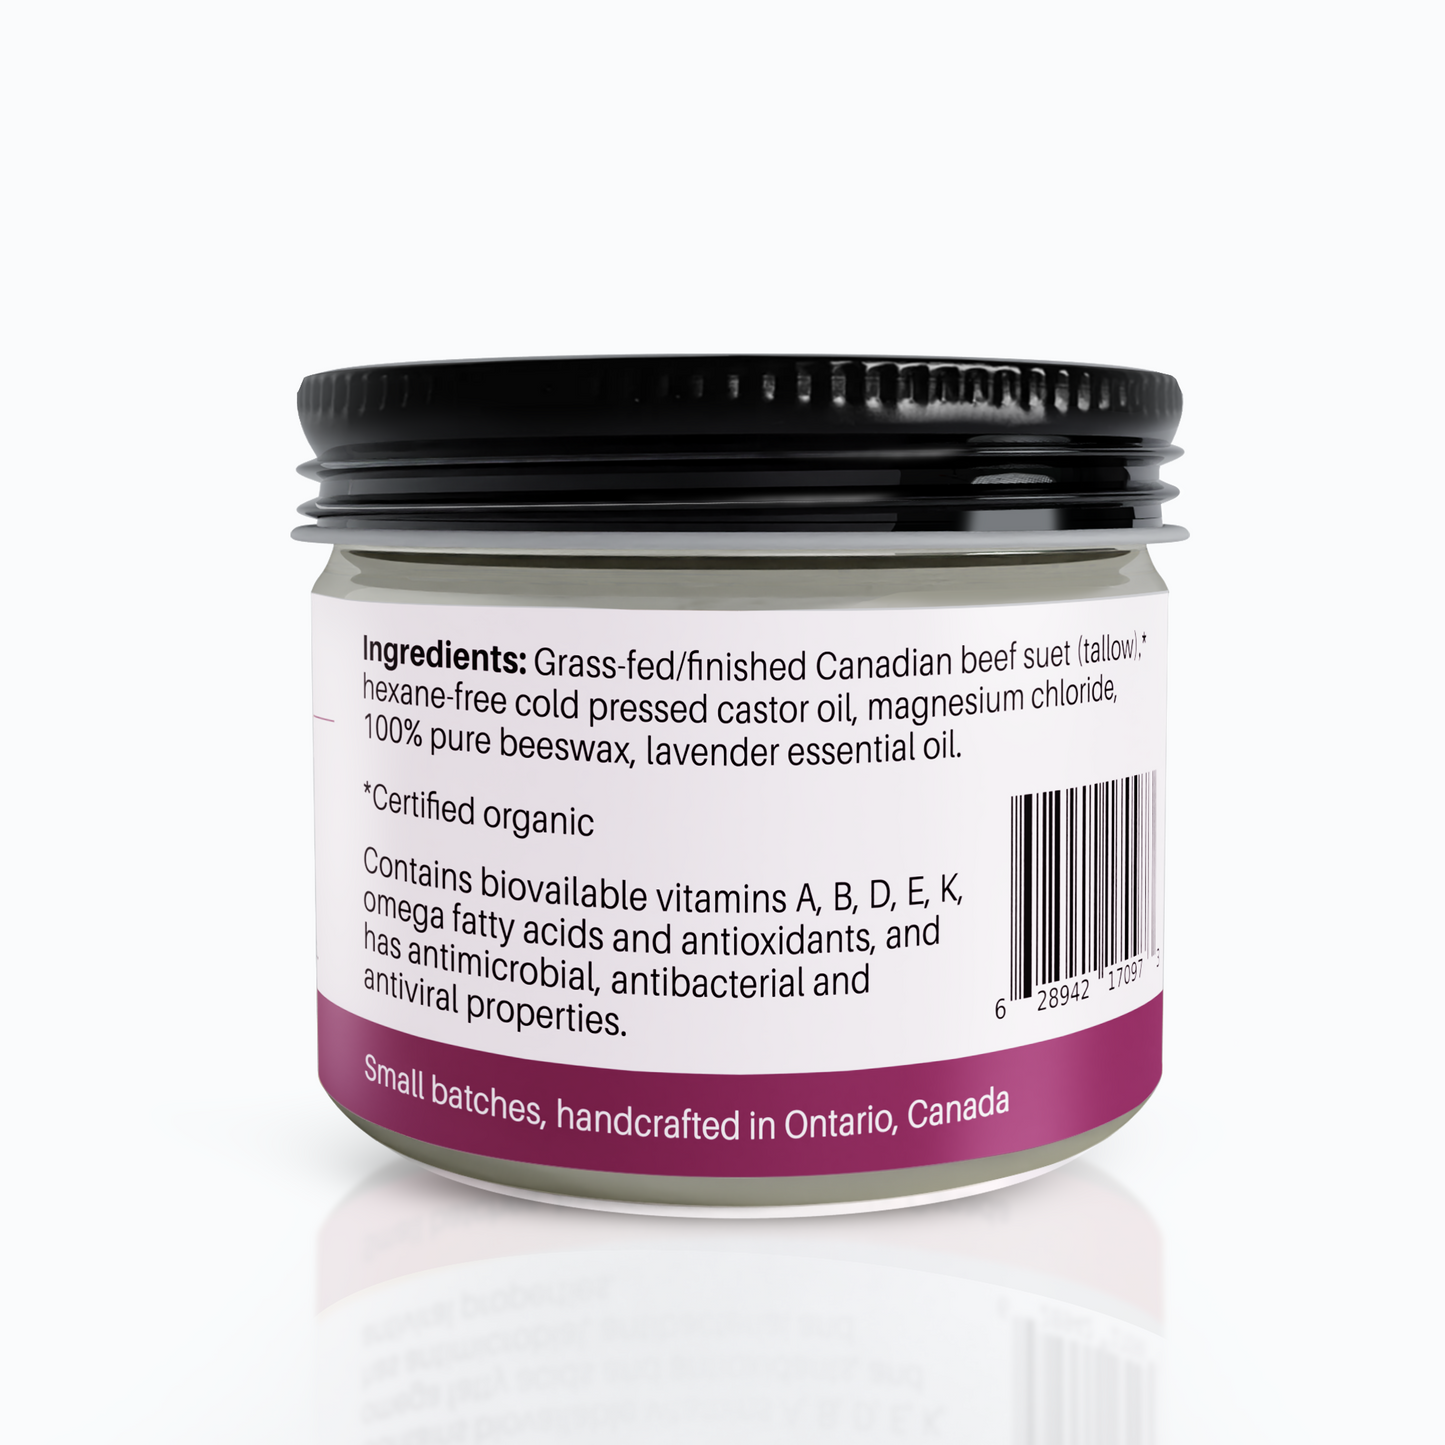 Lavender Feet, Foot Cream, Lavender and Magnesium, Organic Grass-Fed/Finished Tallow 60 ml